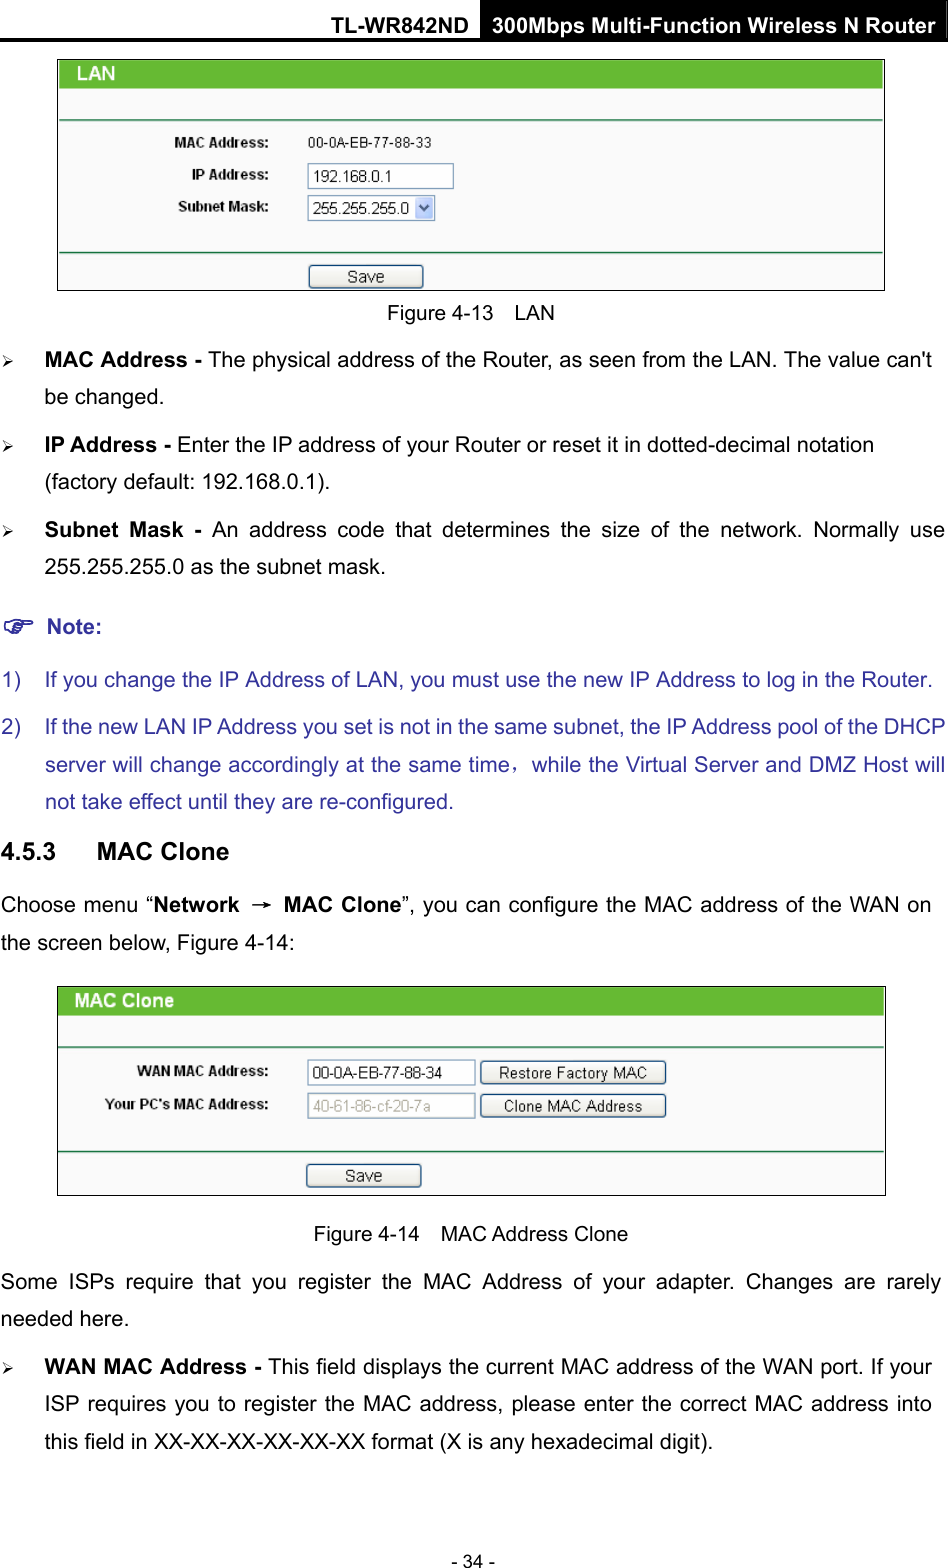 TL-WR842ND 300Mbps Multi-Function Wireless N Router - 34 -  Figure 4-13  LAN ¾ MAC Address - The physical address of the Router, as seen from the LAN. The value can&apos;t be changed. ¾ IP Address - Enter the IP address of your Router or reset it in dotted-decimal notation (factory default: 192.168.0.1). ¾ Subnet Mask - An address code that determines the size of the network. Normally use 255.255.255.0 as the subnet mask.   ) Note: 1)  If you change the IP Address of LAN, you must use the new IP Address to log in the Router.   2)  If the new LAN IP Address you set is not in the same subnet, the IP Address pool of the DHCP server will change accordingly at the same time，while the Virtual Server and DMZ Host will not take effect until they are re-configured. 4.5.3  MAC Clone Choose menu “Network  → MAC Clone”, you can configure the MAC address of the WAN on the screen below, Figure 4-14:  Figure 4-14  MAC Address Clone Some ISPs require that you register the MAC Address of your adapter. Changes are rarely needed here. ¾ WAN MAC Address - This field displays the current MAC address of the WAN port. If your ISP requires you to register the MAC address, please enter the correct MAC address into this field in XX-XX-XX-XX-XX-XX format (X is any hexadecimal digit).   